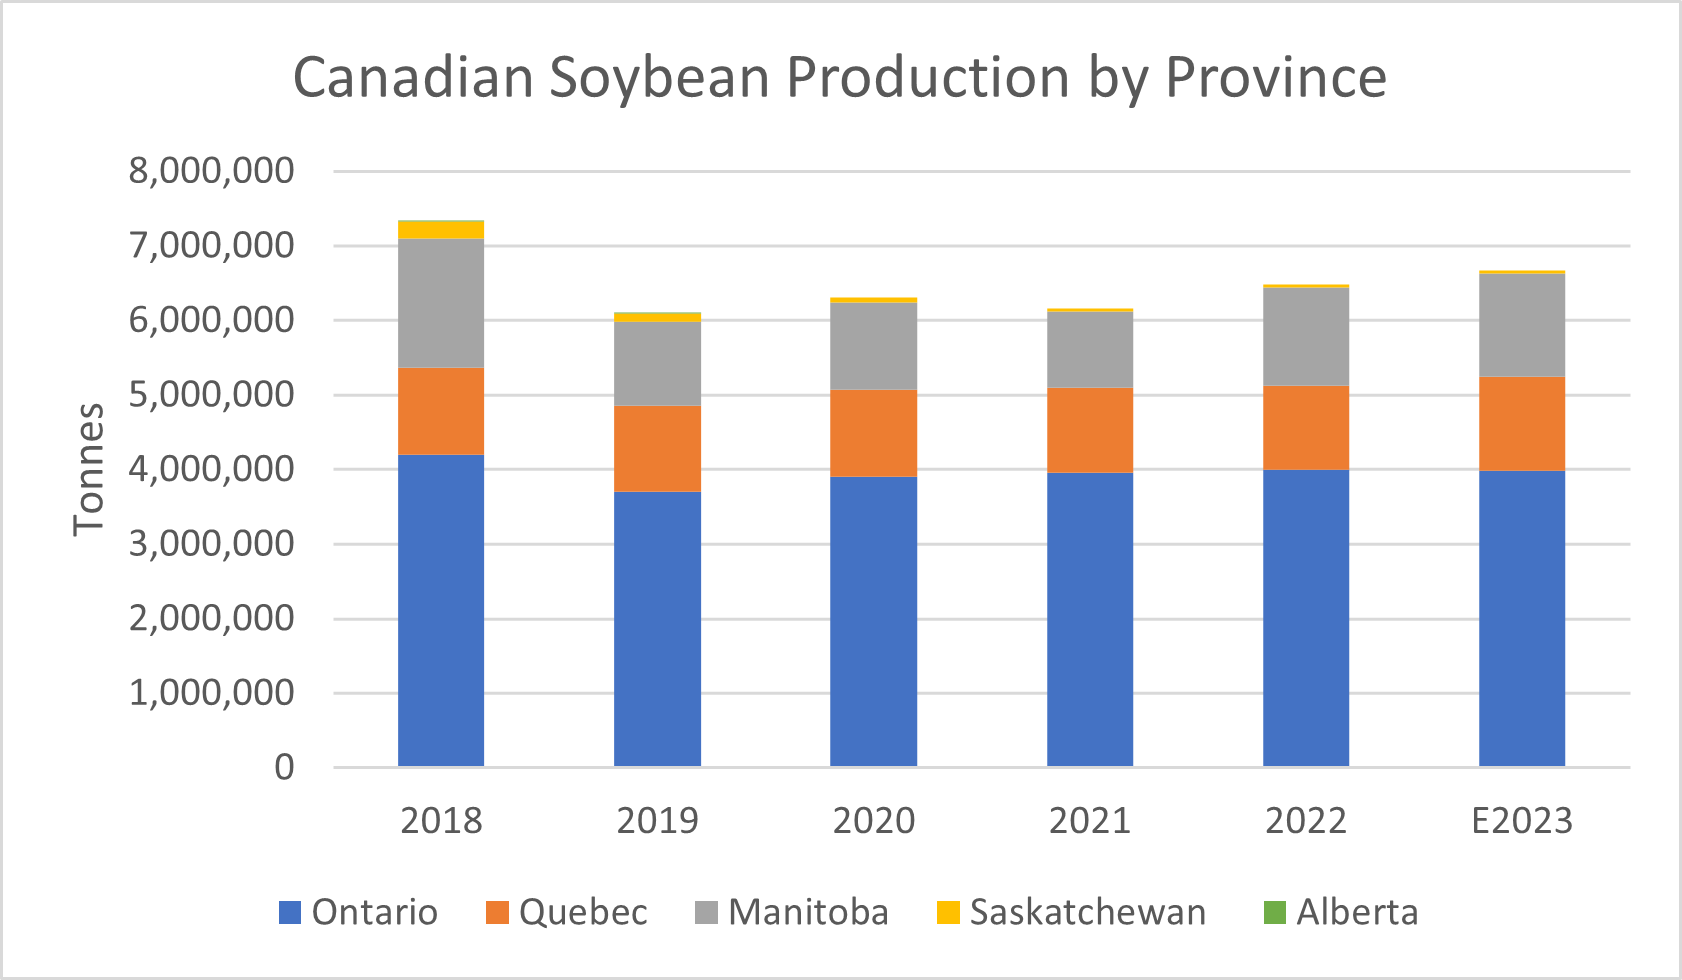 Canadian Soybean Production by Province